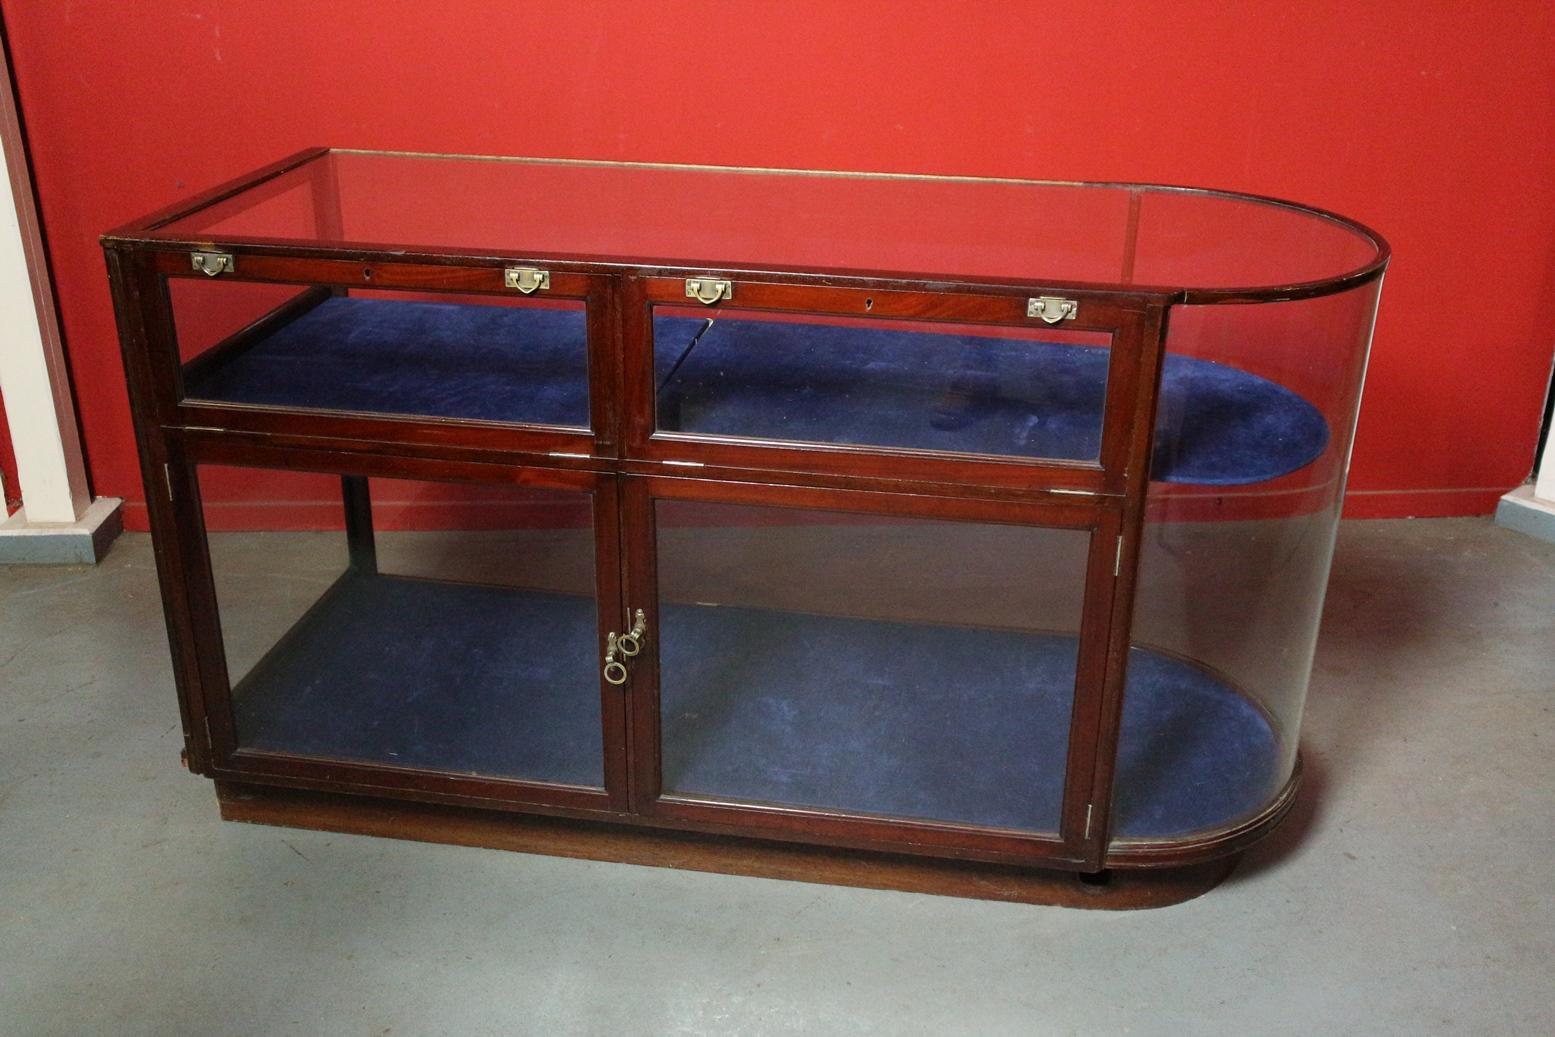 Beautiful antique mahogany counter / display case with curved glass. Equipped with adjustable shelf and 4 doors. Entirely in good and completely original condition.

Origin: England
Period: Approx. 1900
Size 157cm x 60cm x h.90cm.